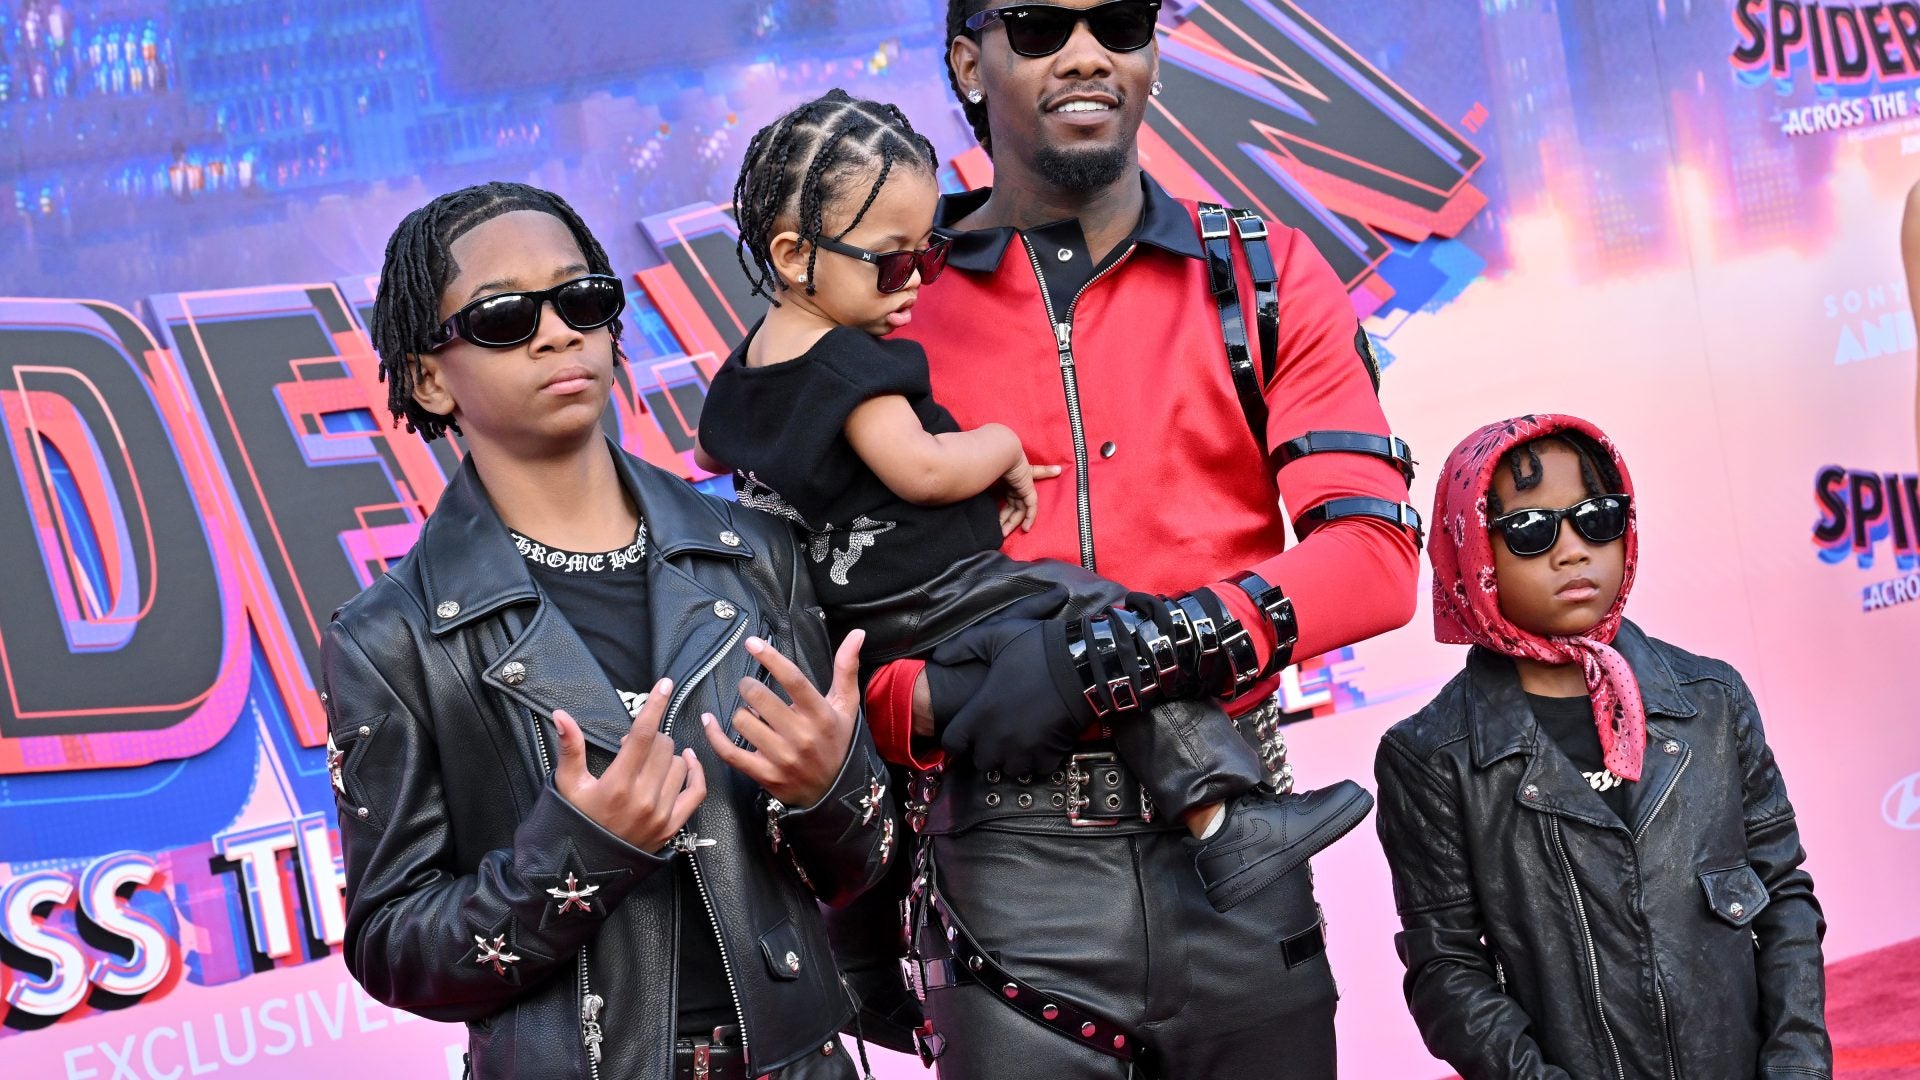 The Stars And Their Kids Came Out For The 'Spider-Man: Across The Multi-Verse' Premiere In LA